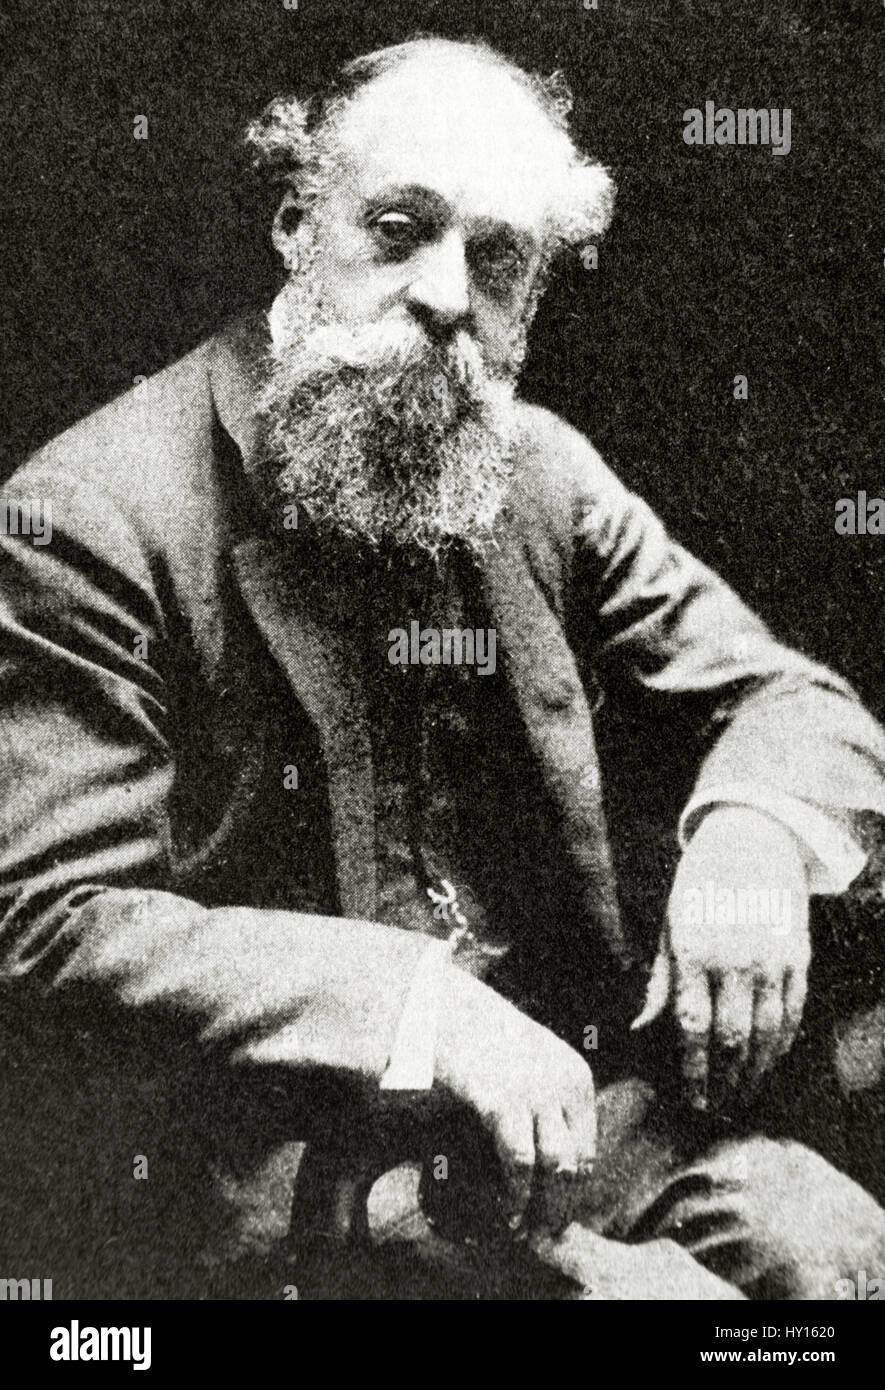 Eusebi Guell i Bacigalupi, 1st Count of Guell (1846-1918). Spanish industrialist and politician. Known for being the patron of the modernist architect Antonio Gaudi. Portrait. Stock Photo